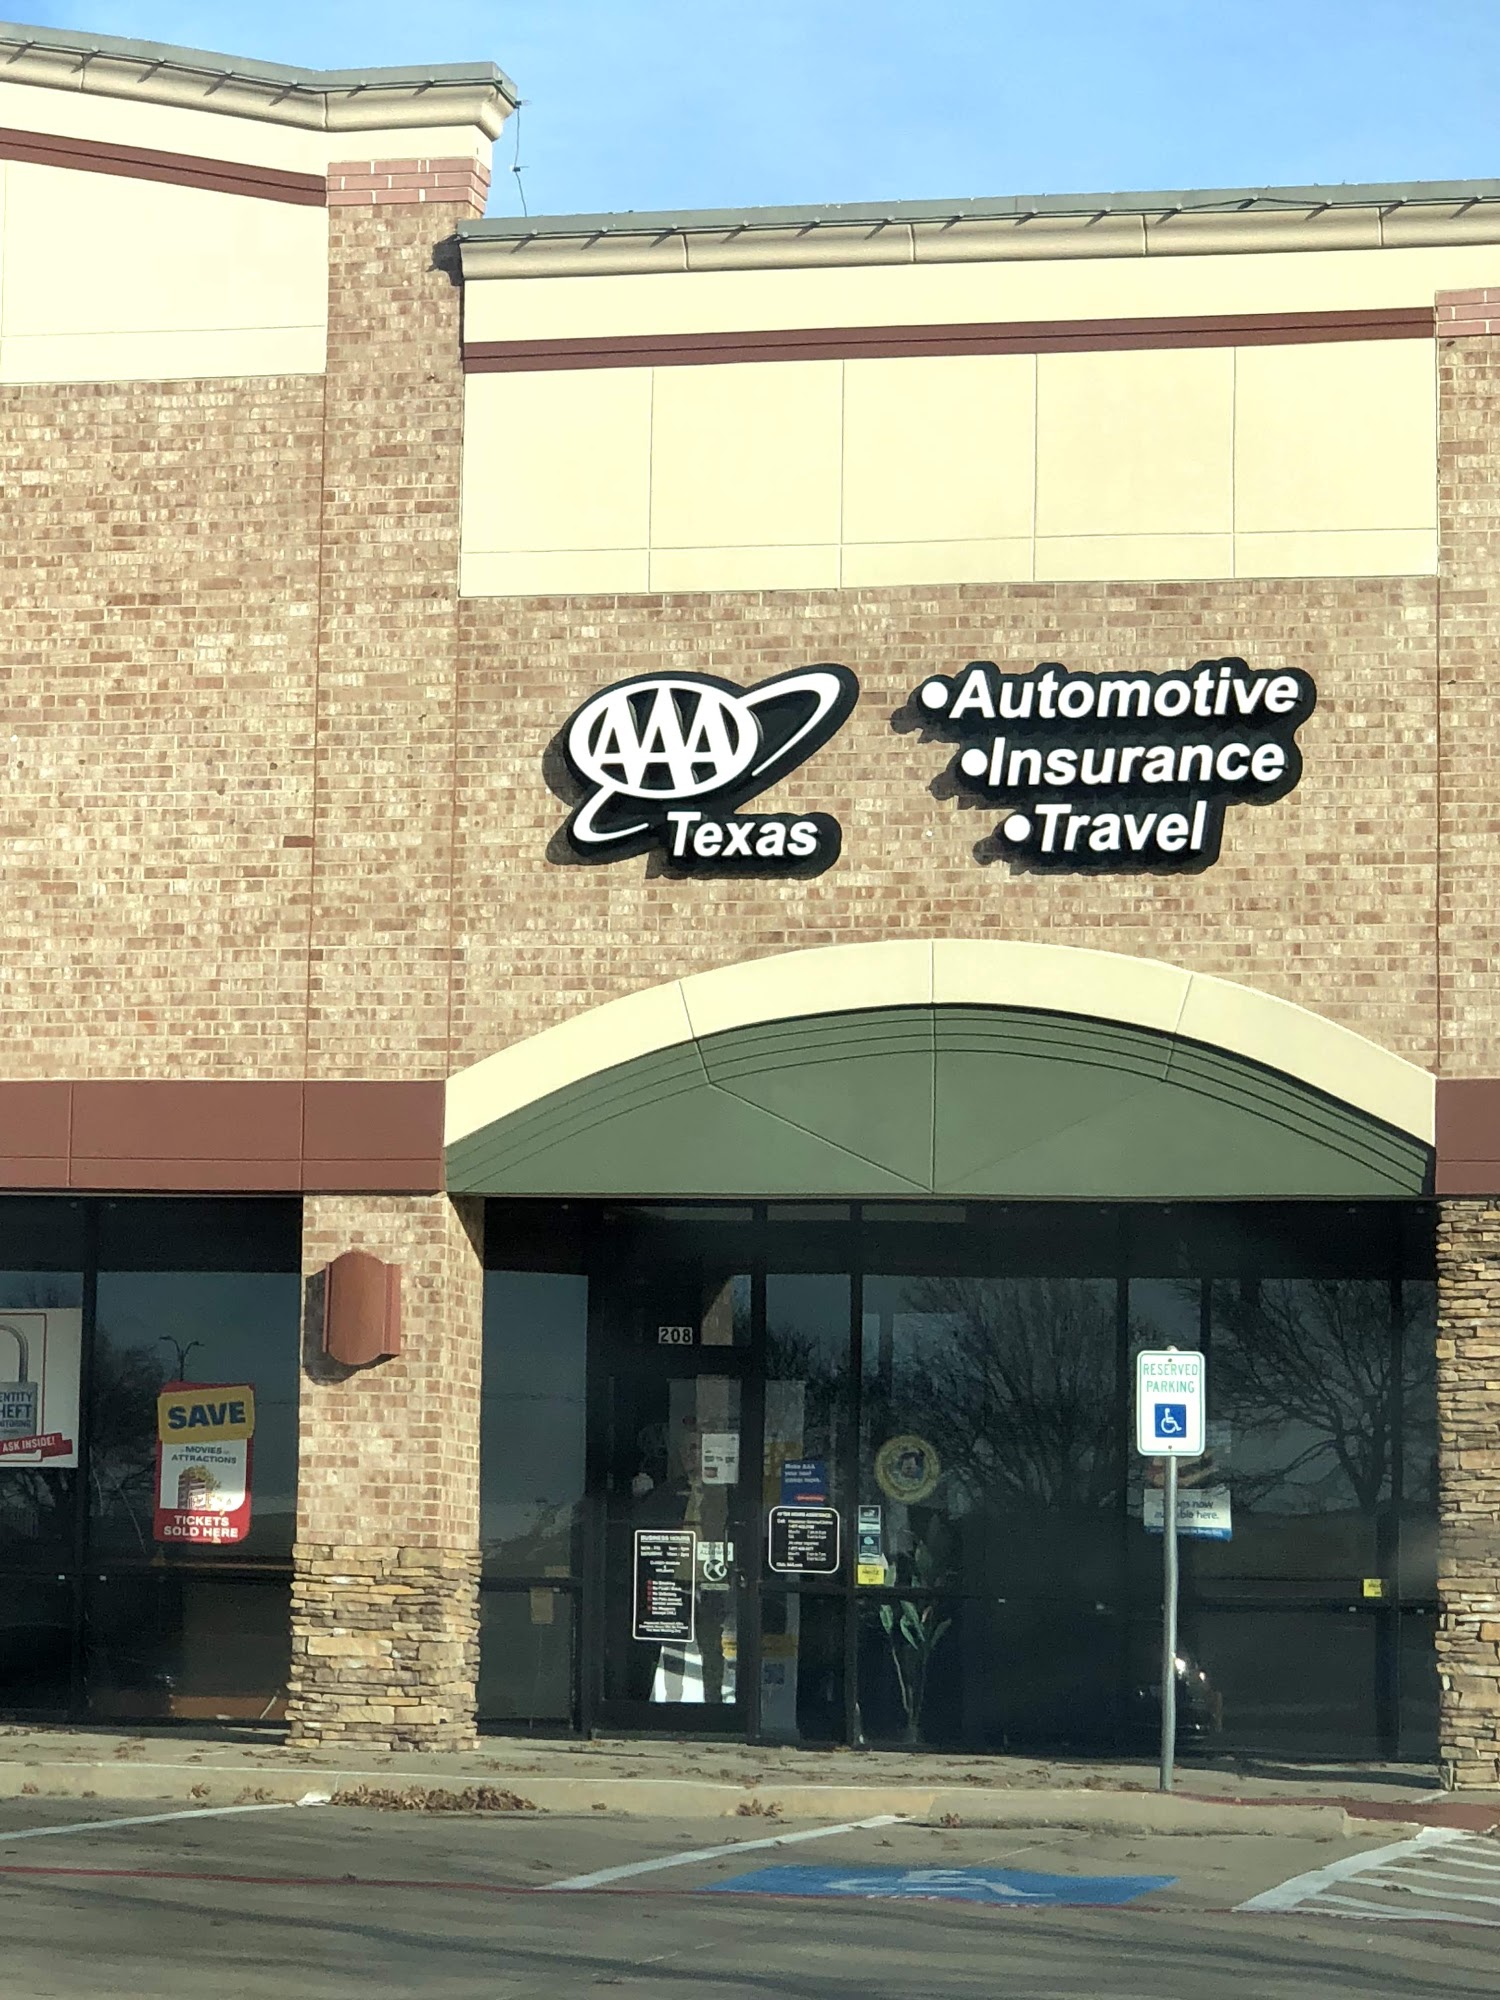 AAA Frisco Insurance and Member Services